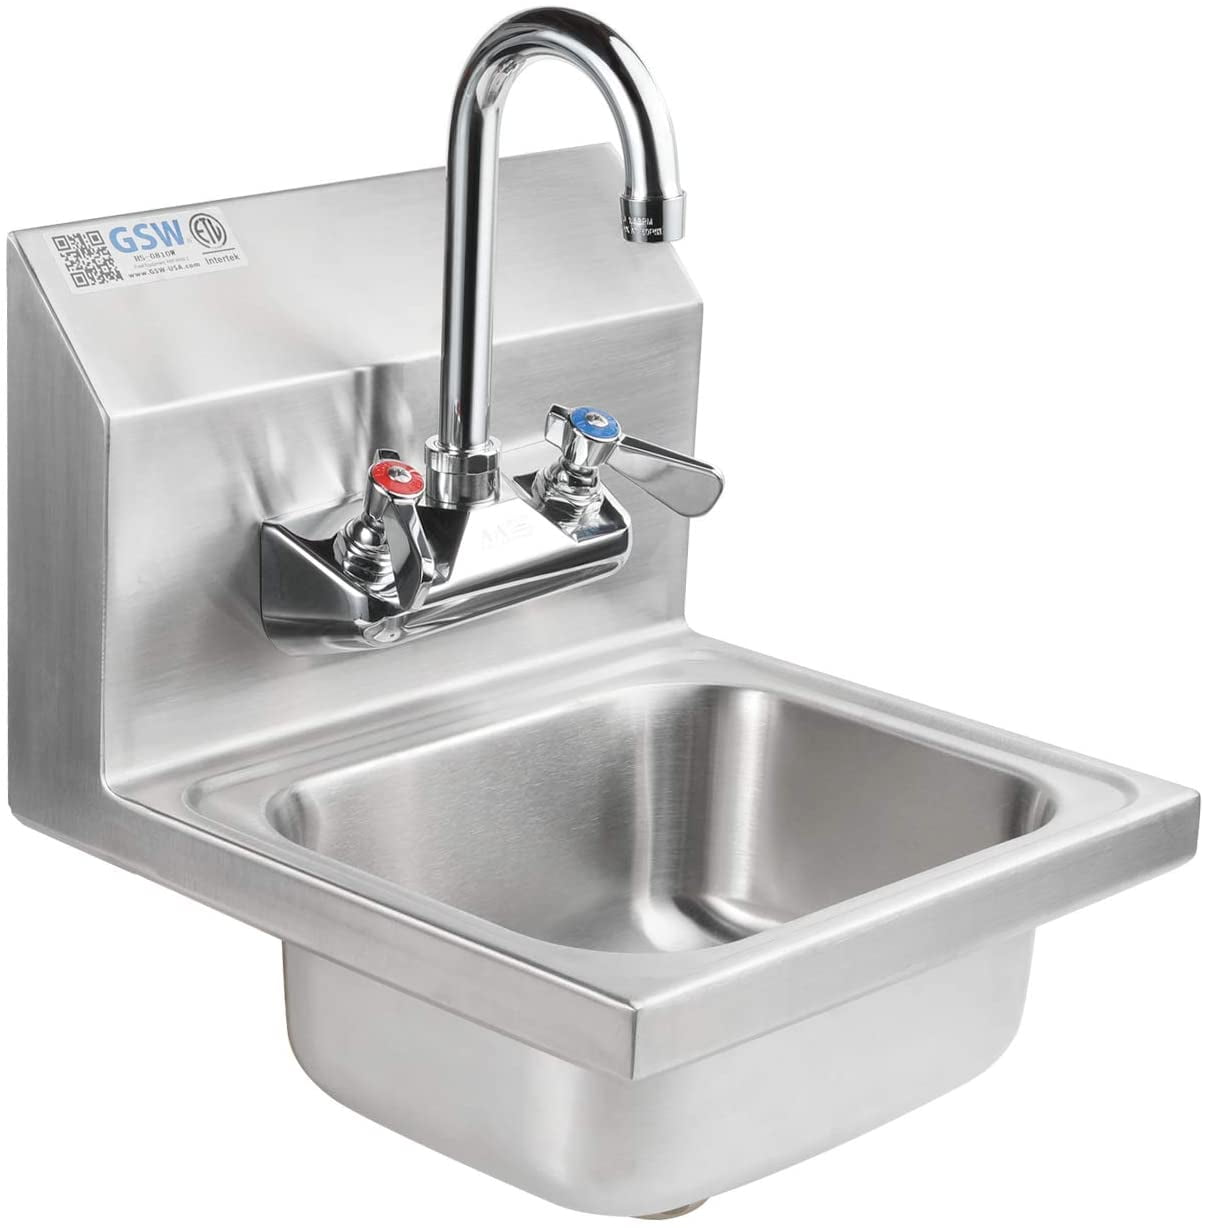 ACE HS0810WG Mini Stainless Steel Wall Mount Hand Sink with Wall Mount No Lead Faucet and